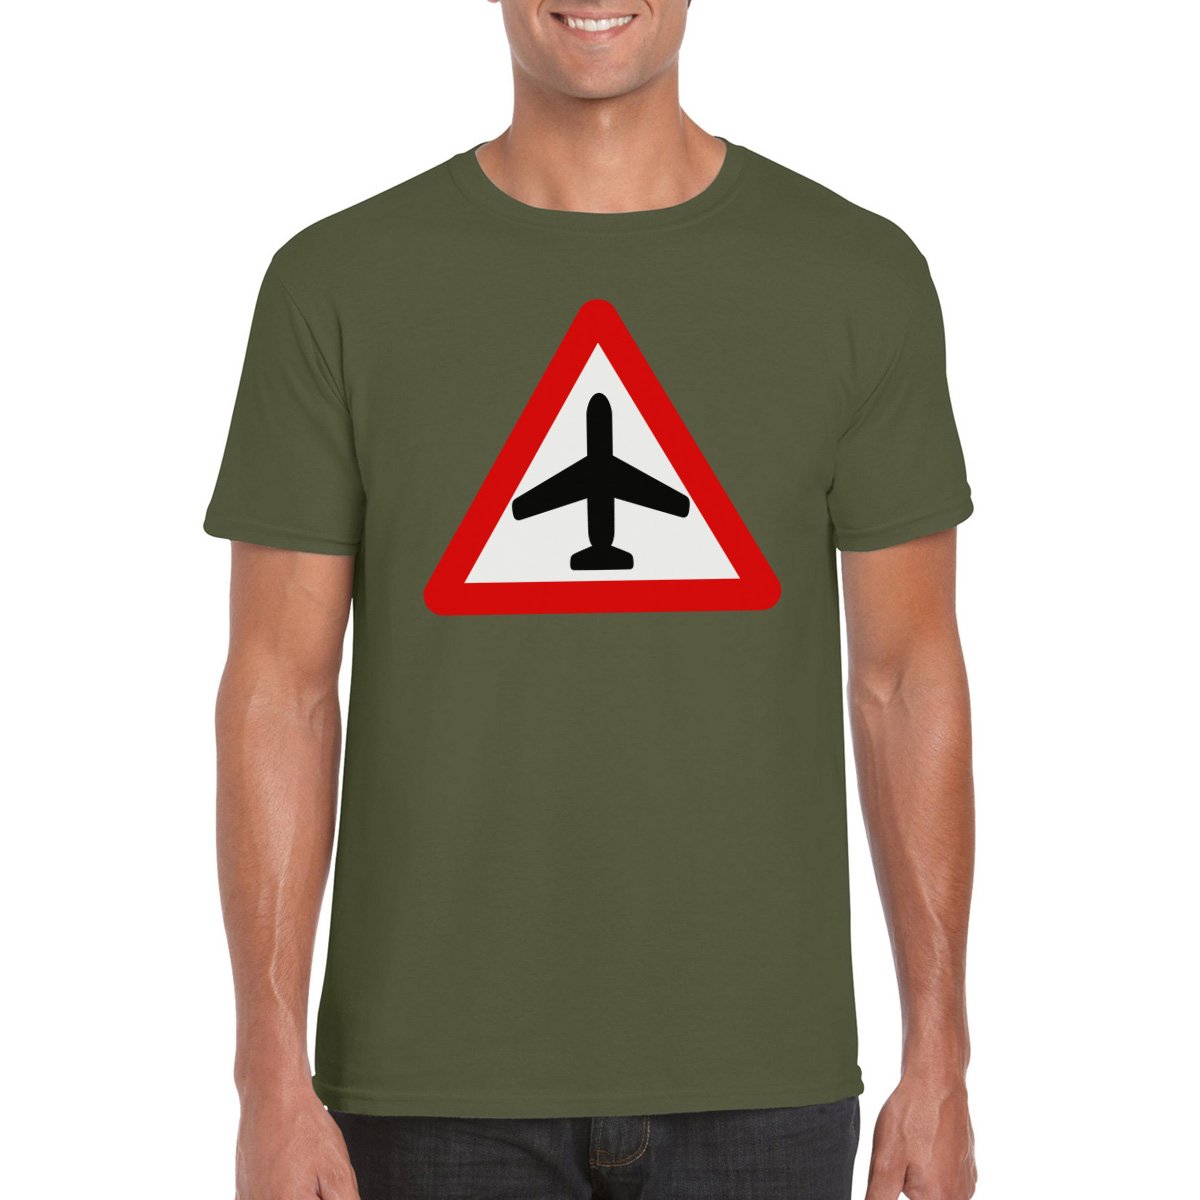 CAUTION AIRCRAFT Semi-Fitted Unisex T-Shirt